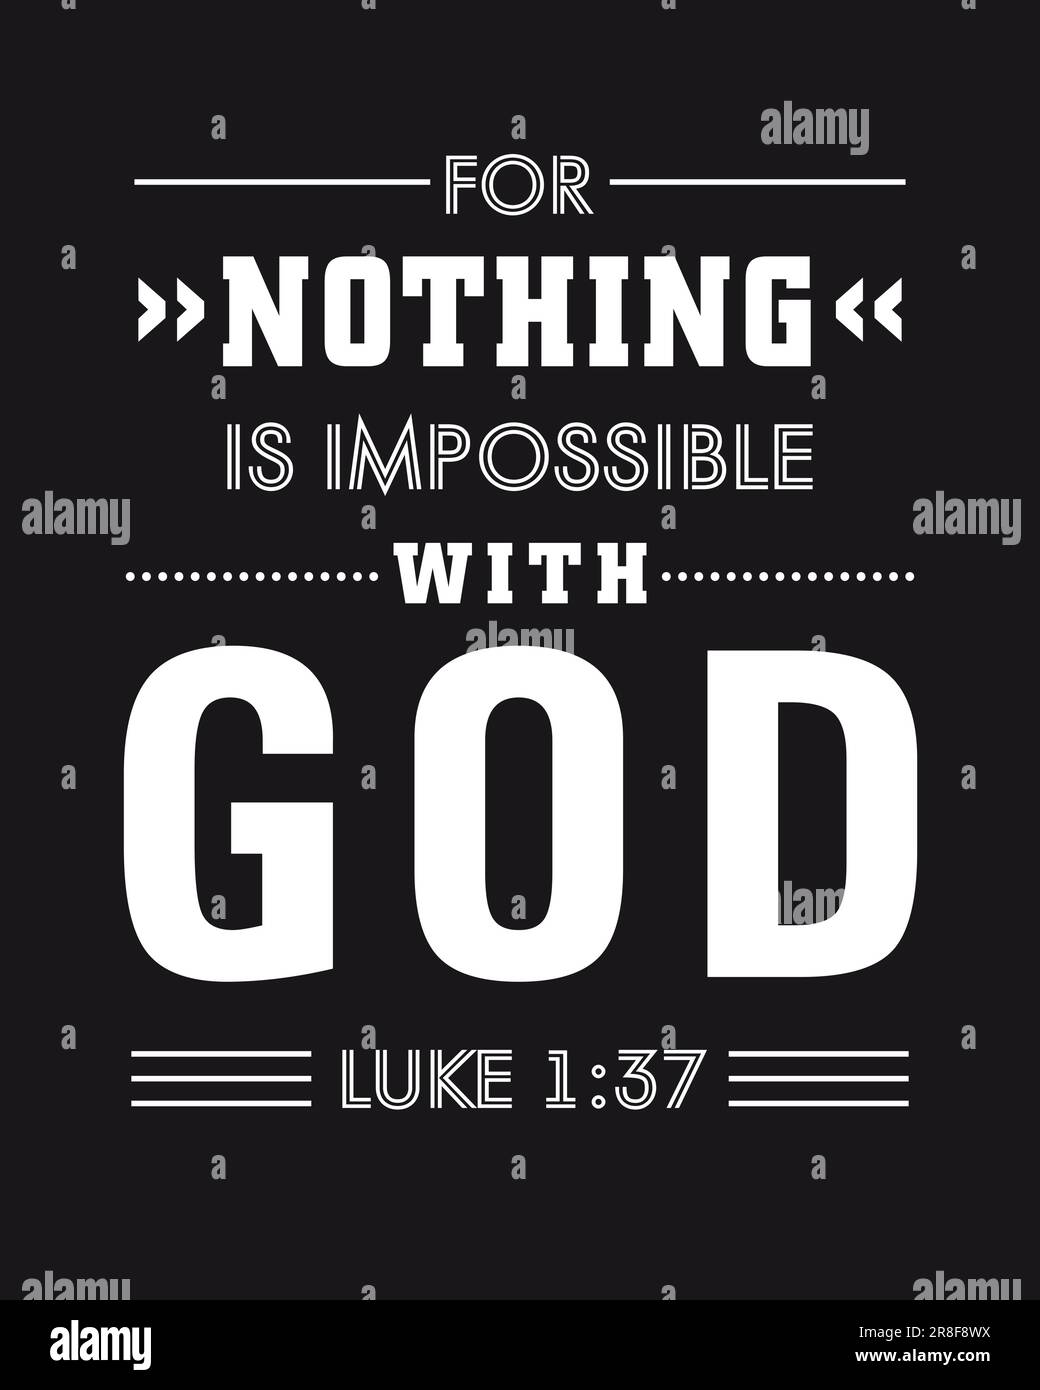 For nothing is impossible for God, t-shirt design. Christian typography background with bible quote Luke 1:37. Vector illustration Stock Vector